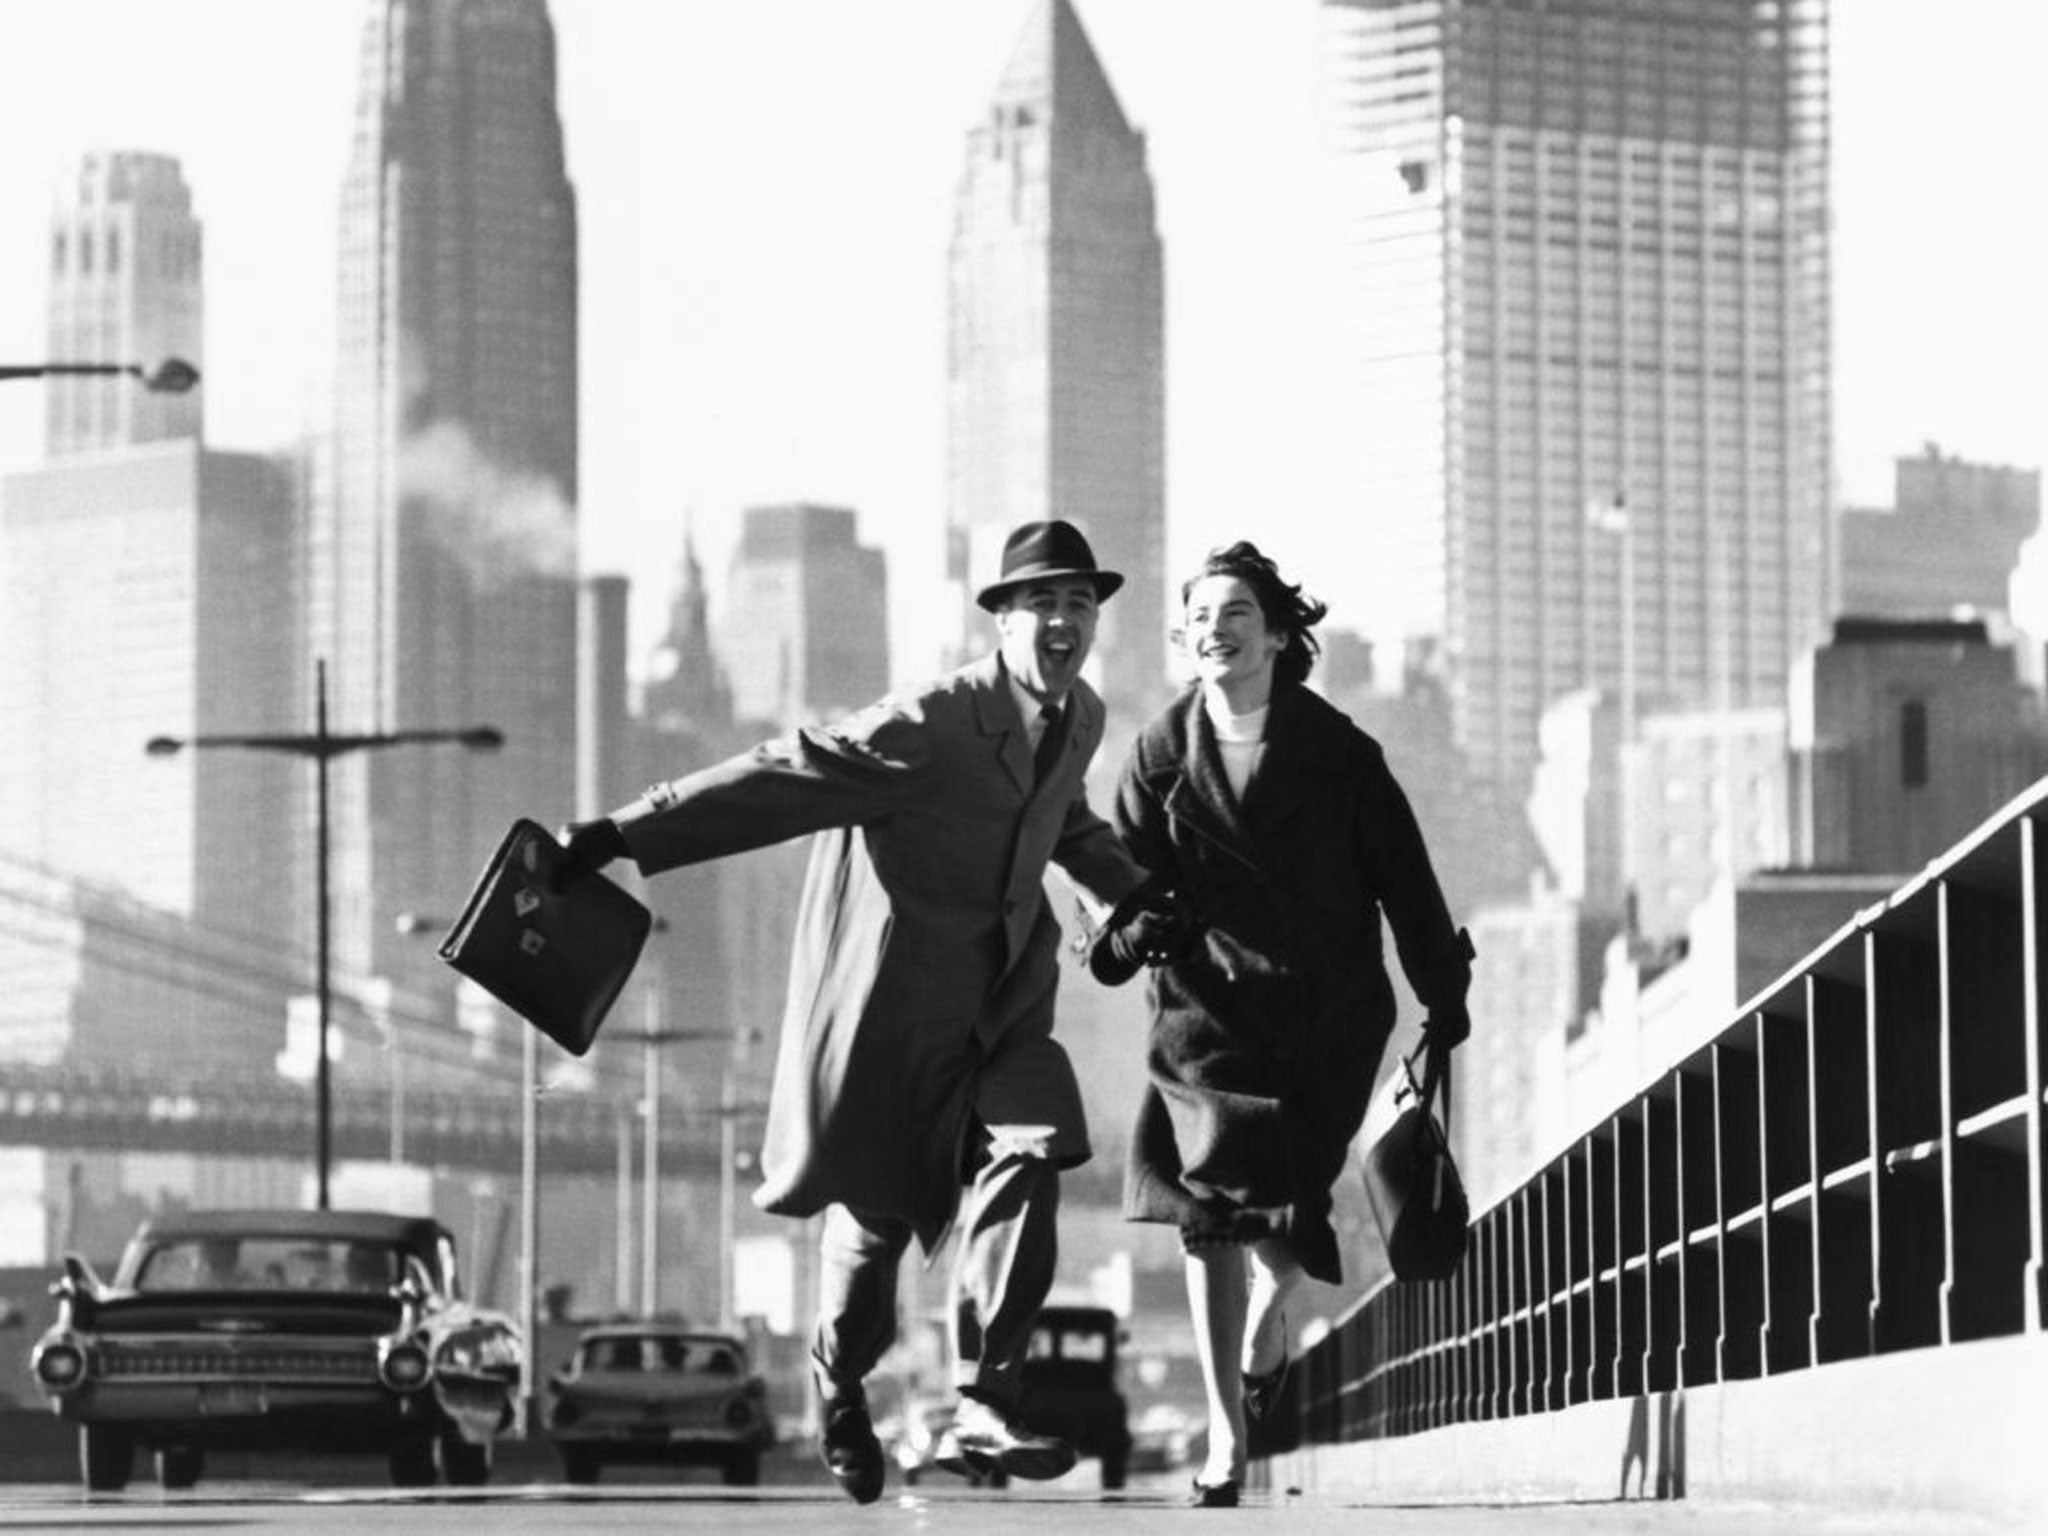 This 1959 image of a carefree couple on Brooklyn Bridge running towards the camera with the New York skyline as their backdrop, is one of Norman Parkinson's most famous shots